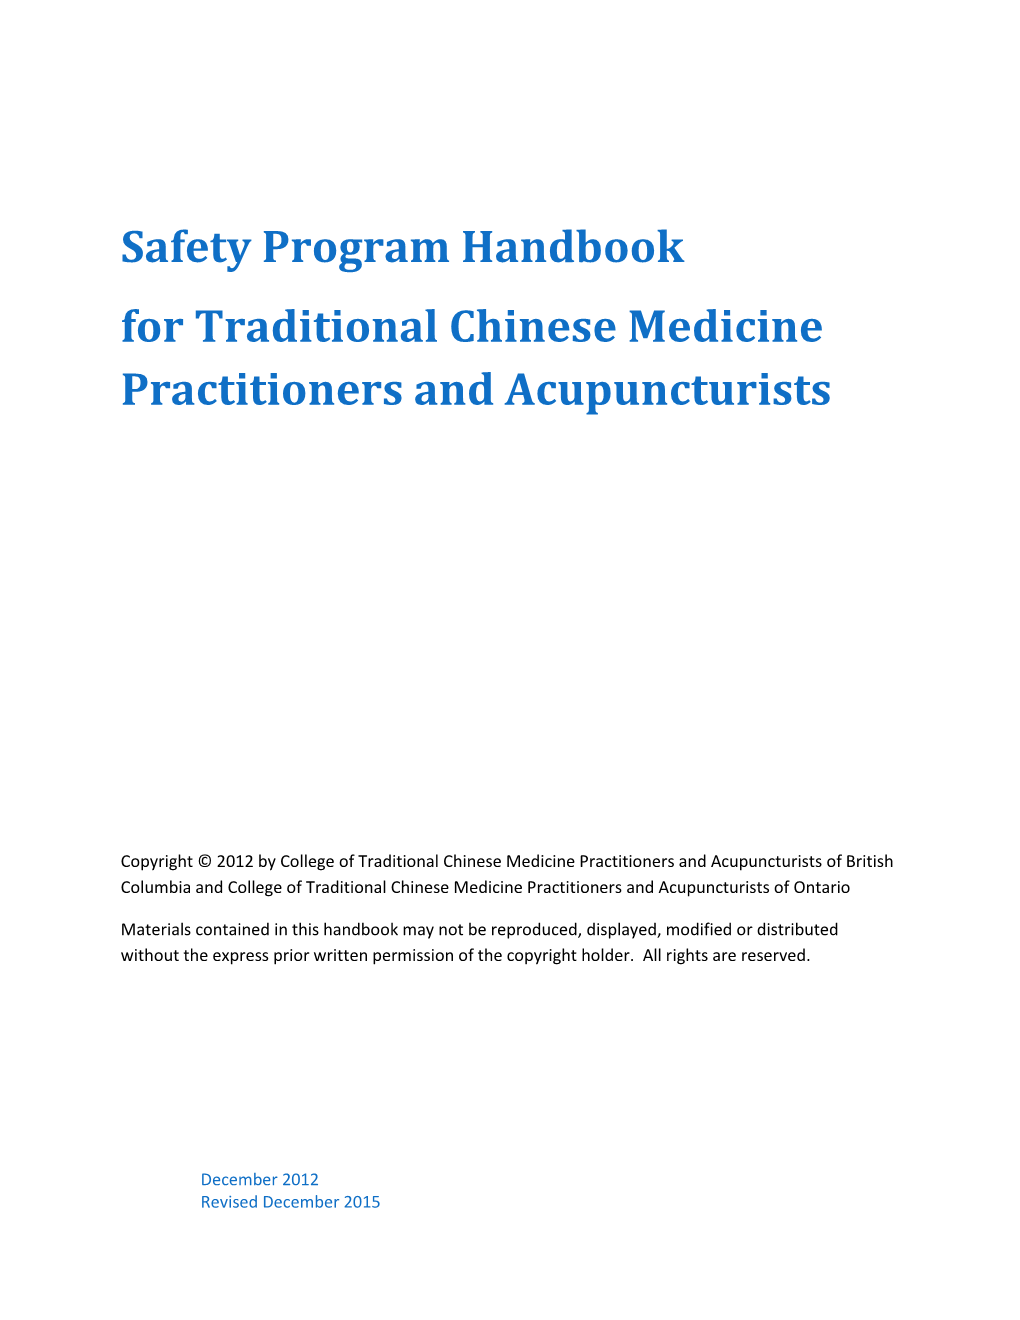 Safety Program for Traditional Chinese Medicine Practit